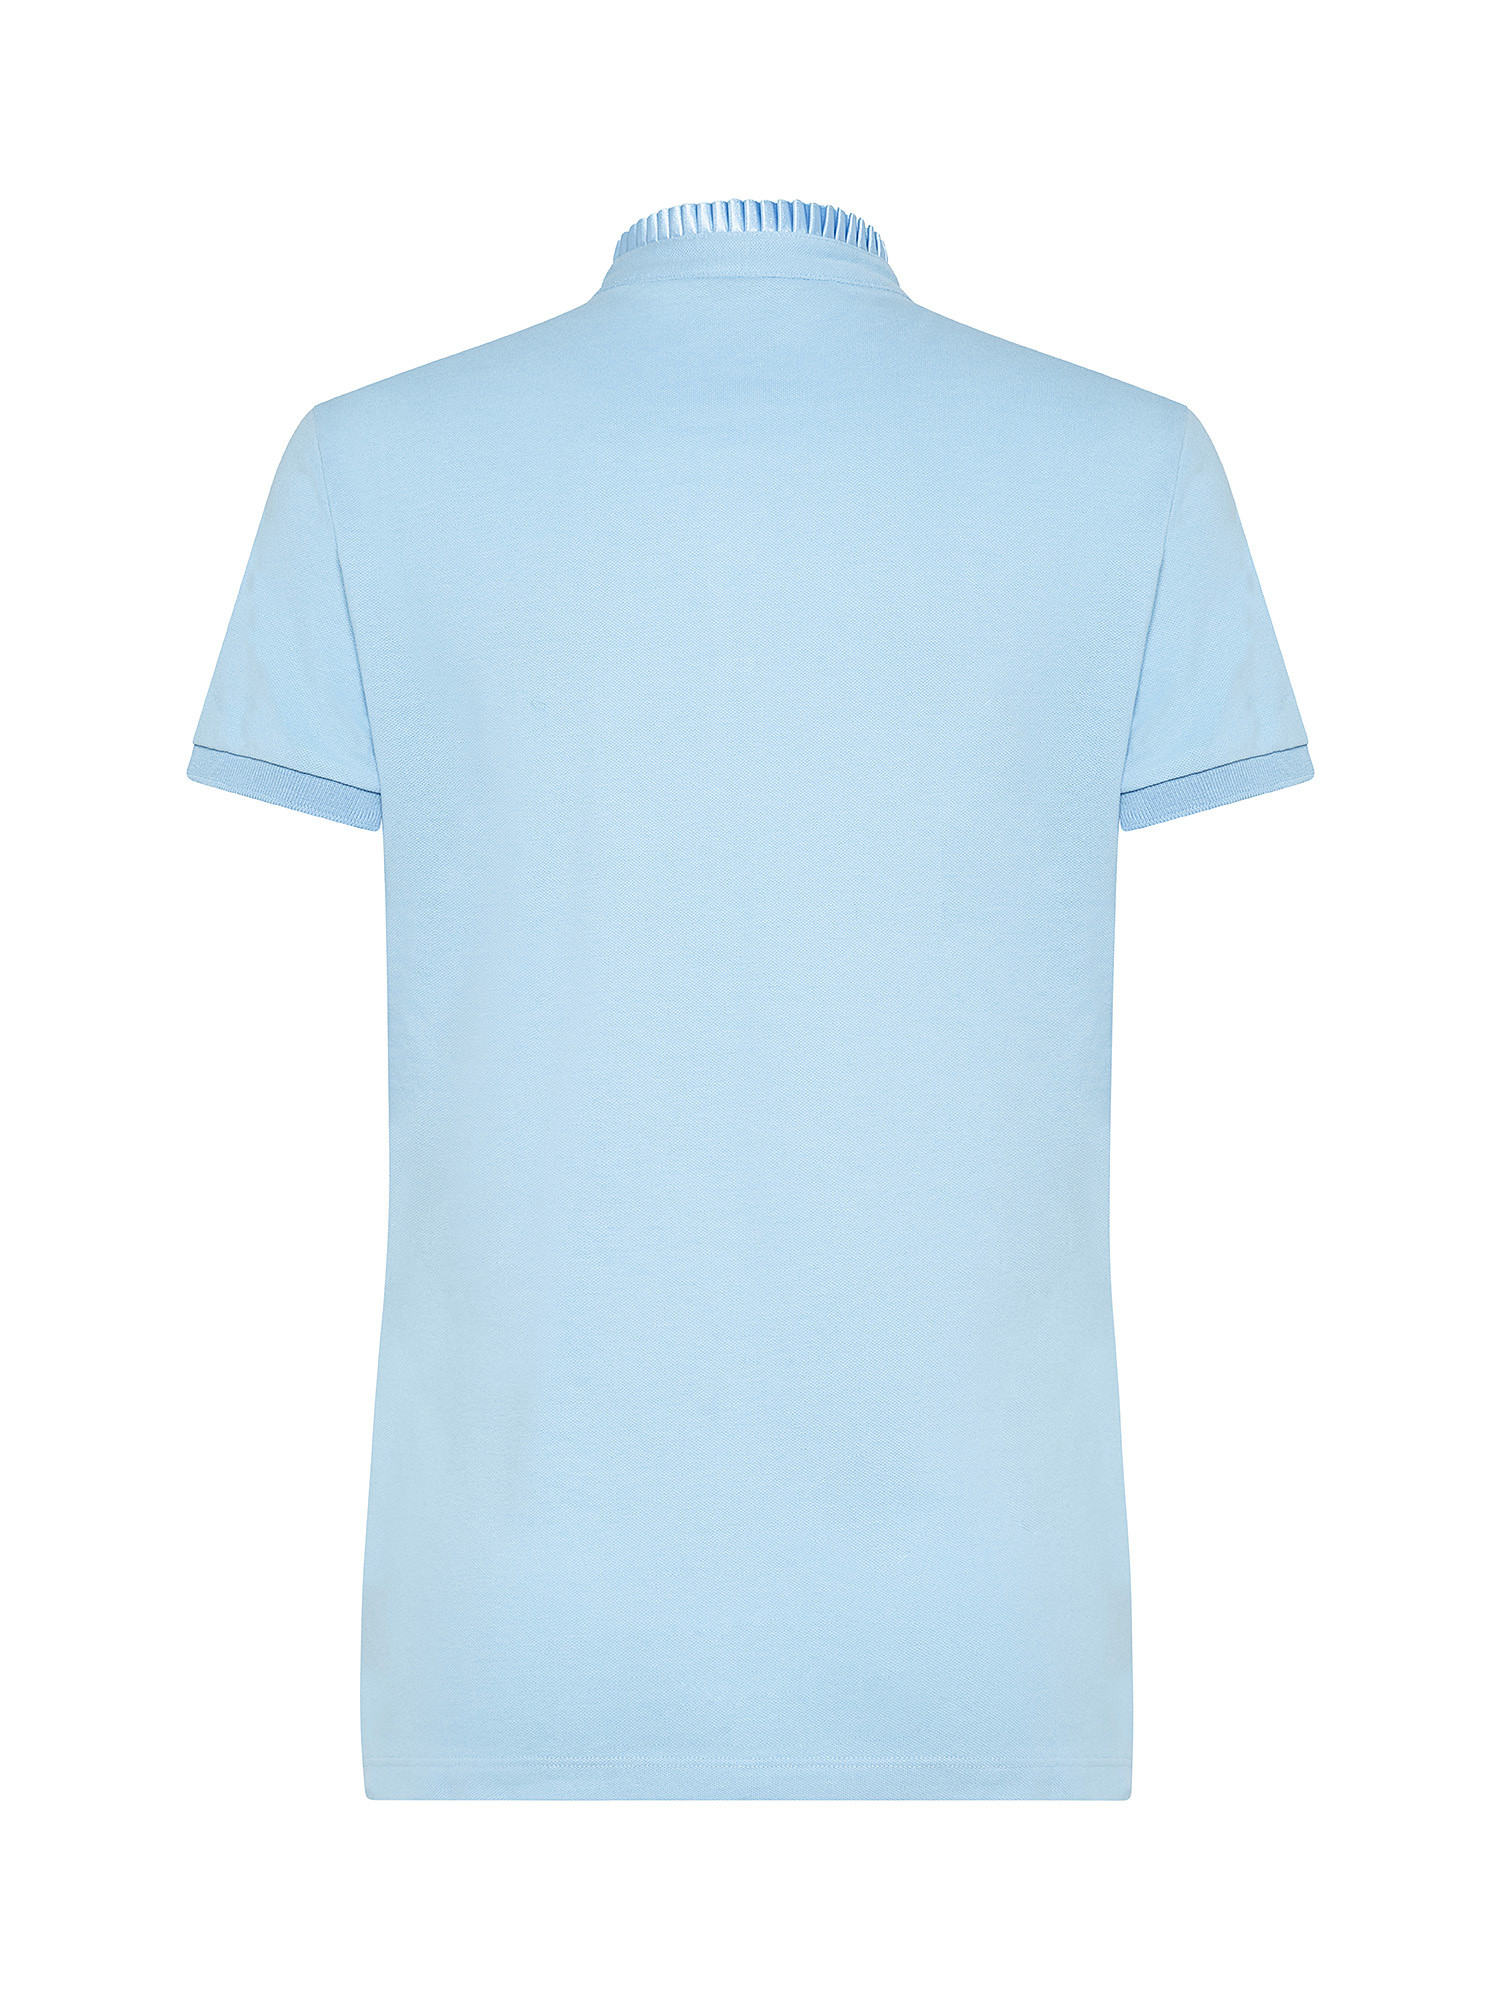 Polo with short sleeves, Light Blue, large image number 1